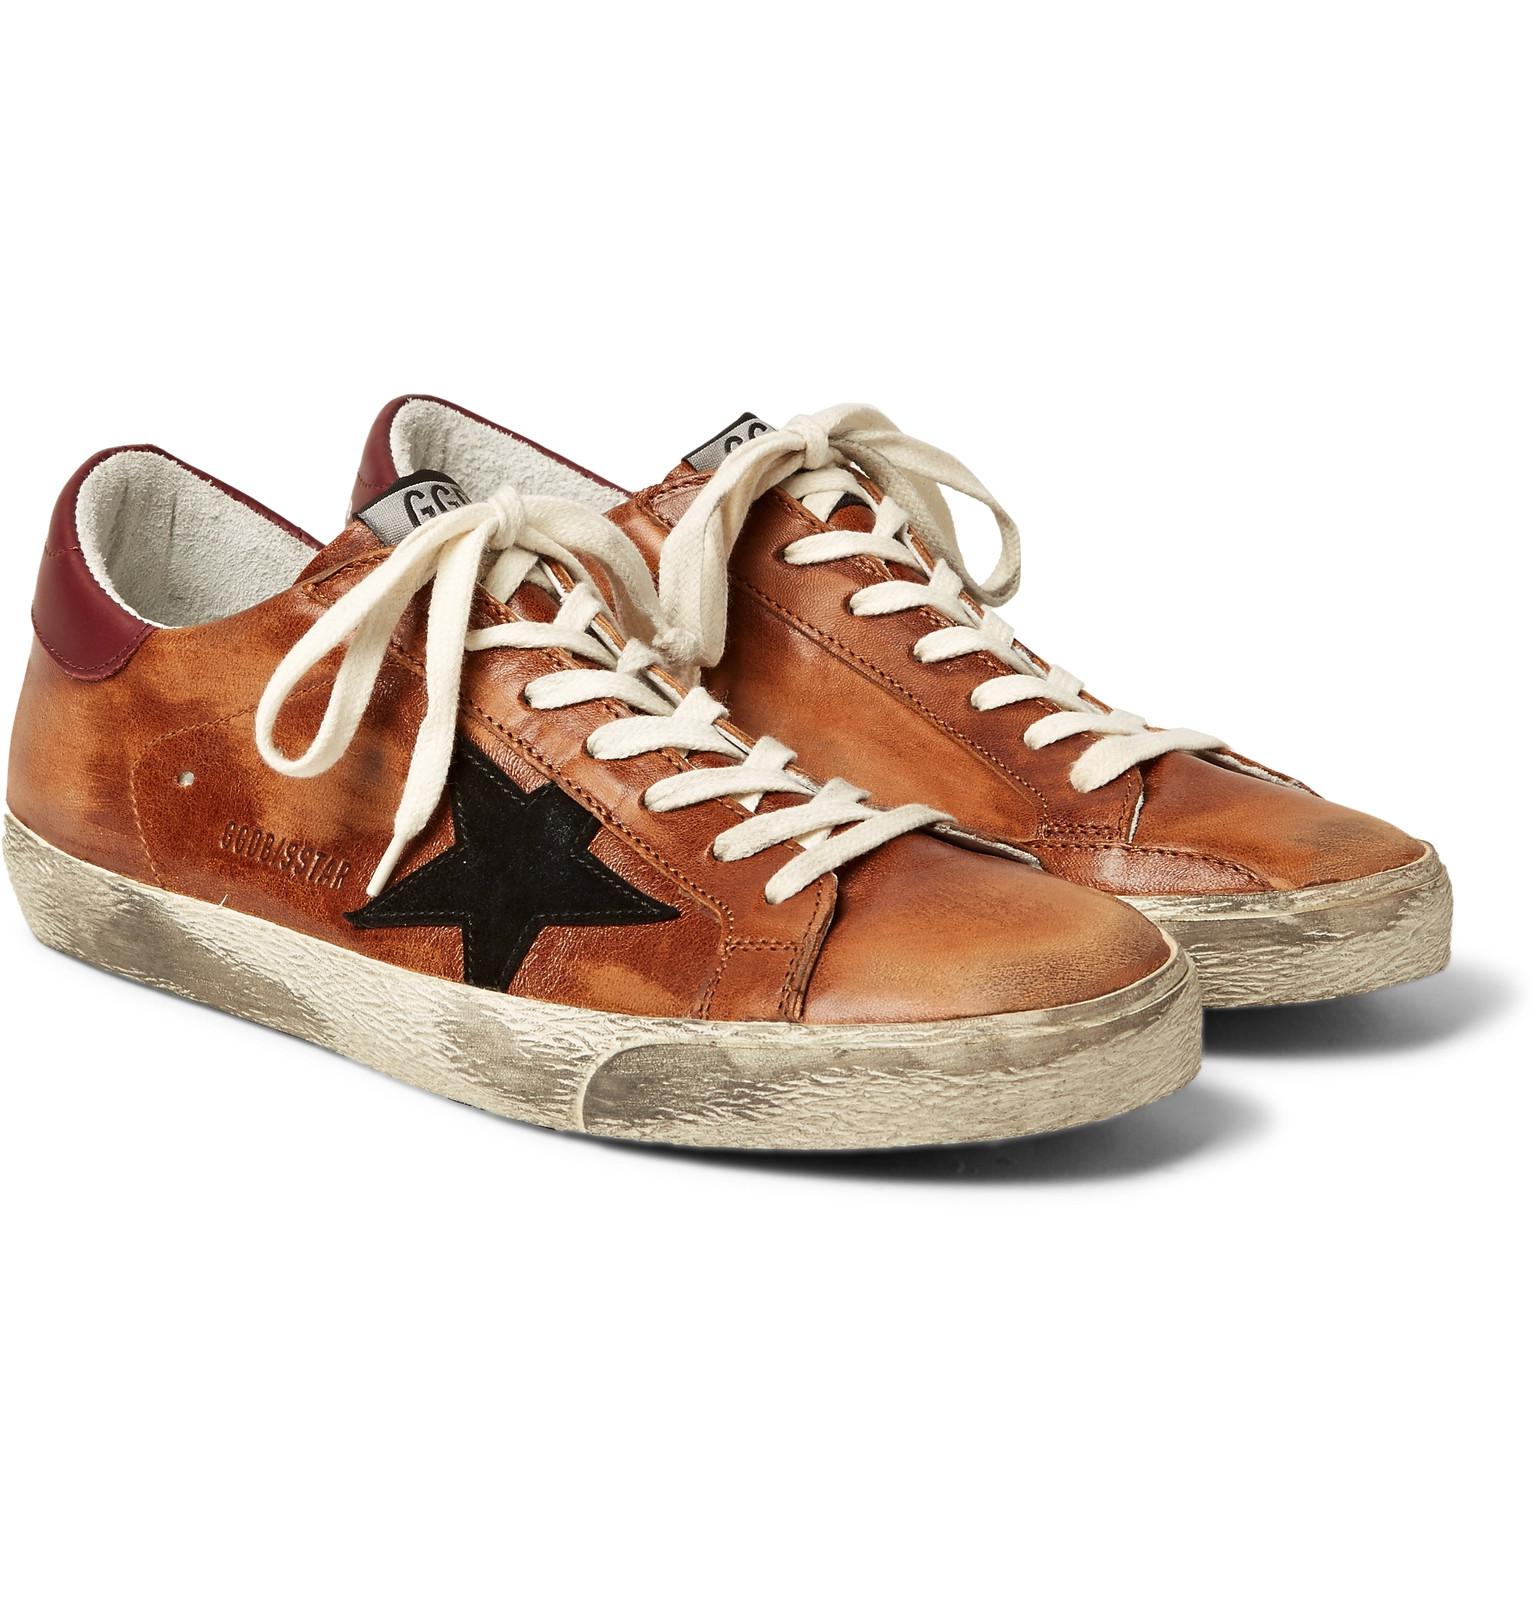 Golden Goose Brown Suede Sneakers Outlet, SAVE 47% - mpgc.net